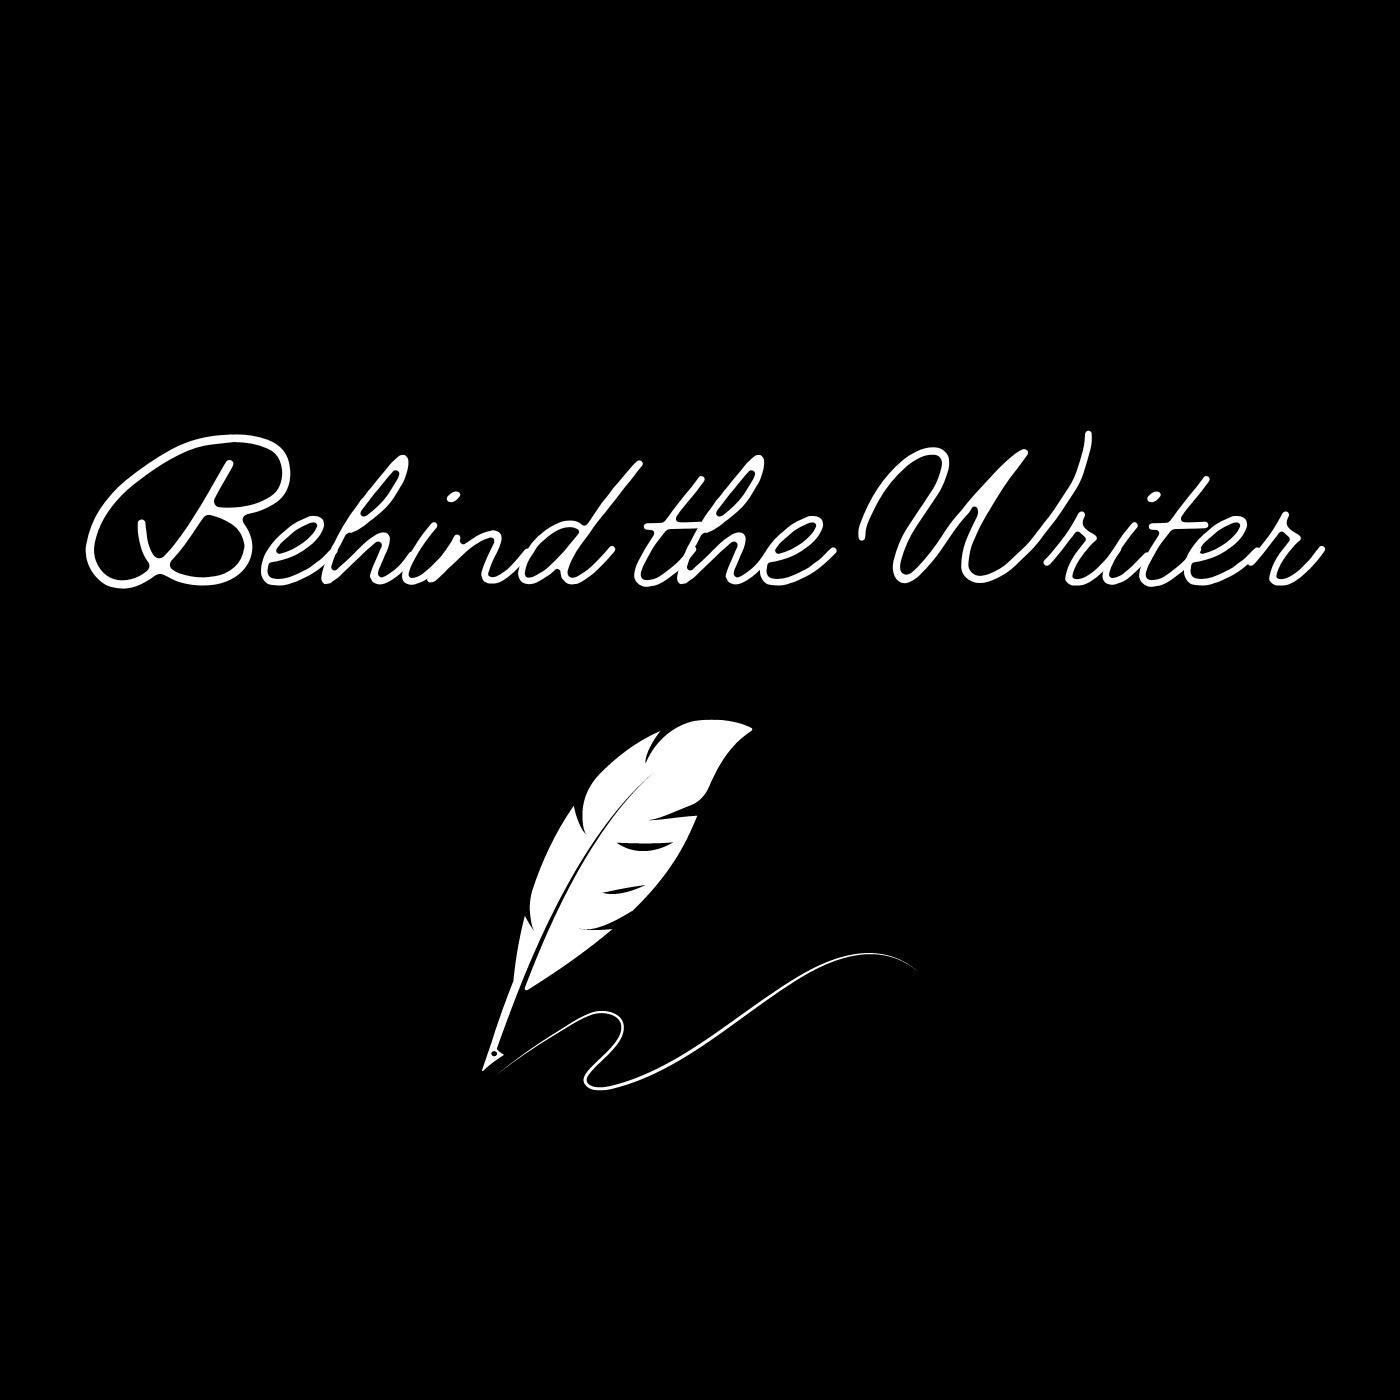 Behind the Writer